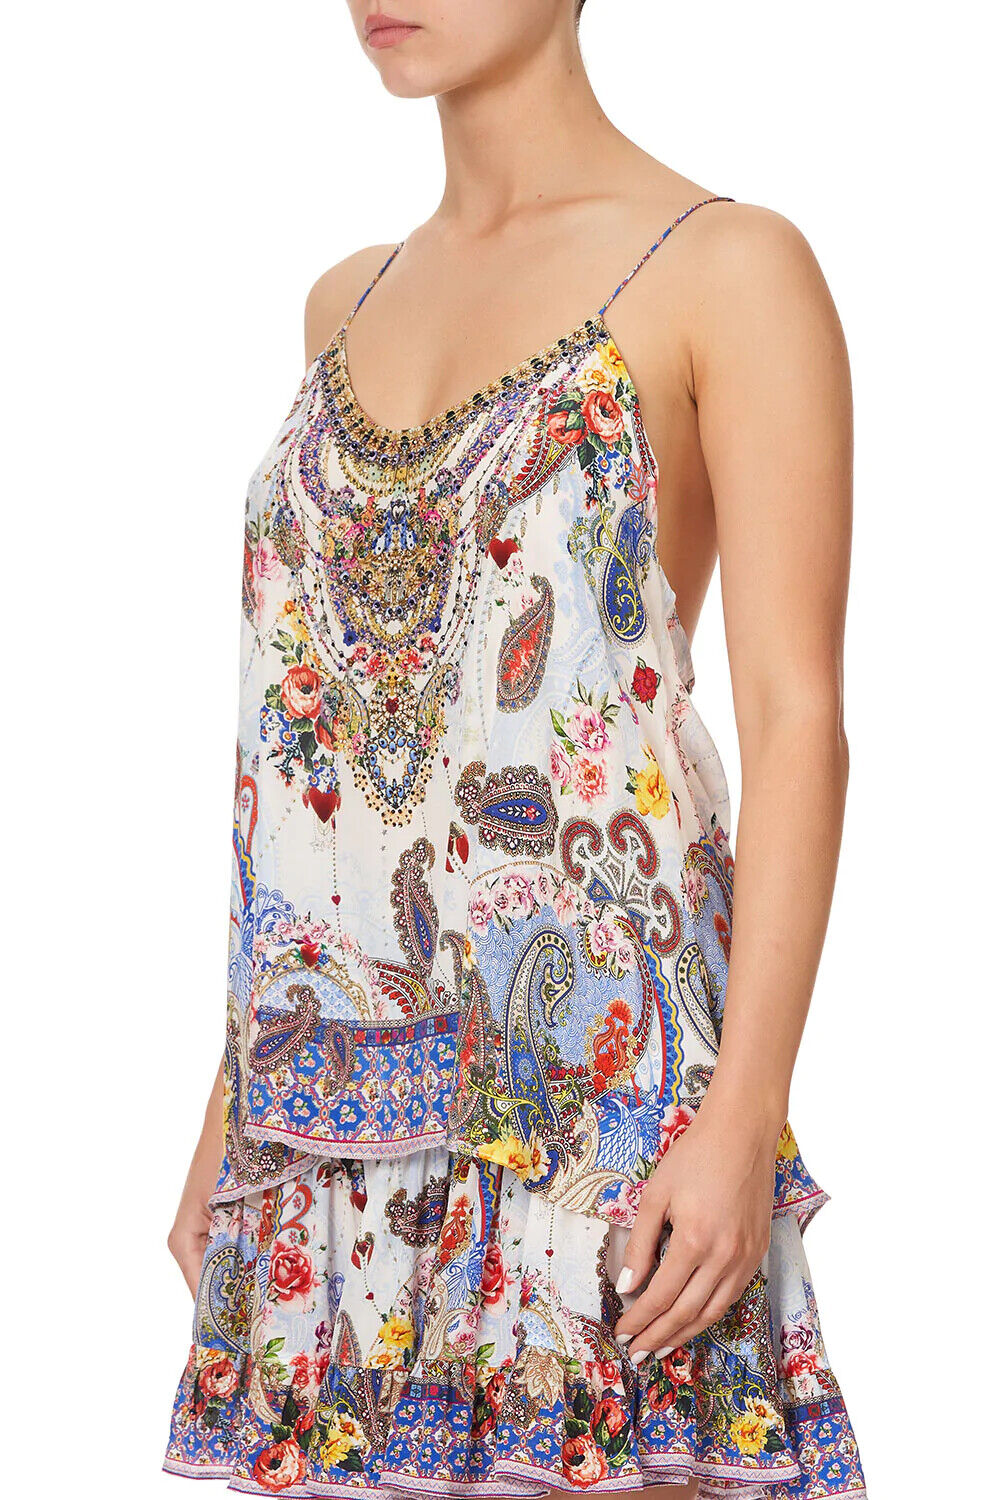 CAMILLA Relaxed Silk Shoestring Top FRIDA FREEDOM Jewelled T-Back Size S BNWT